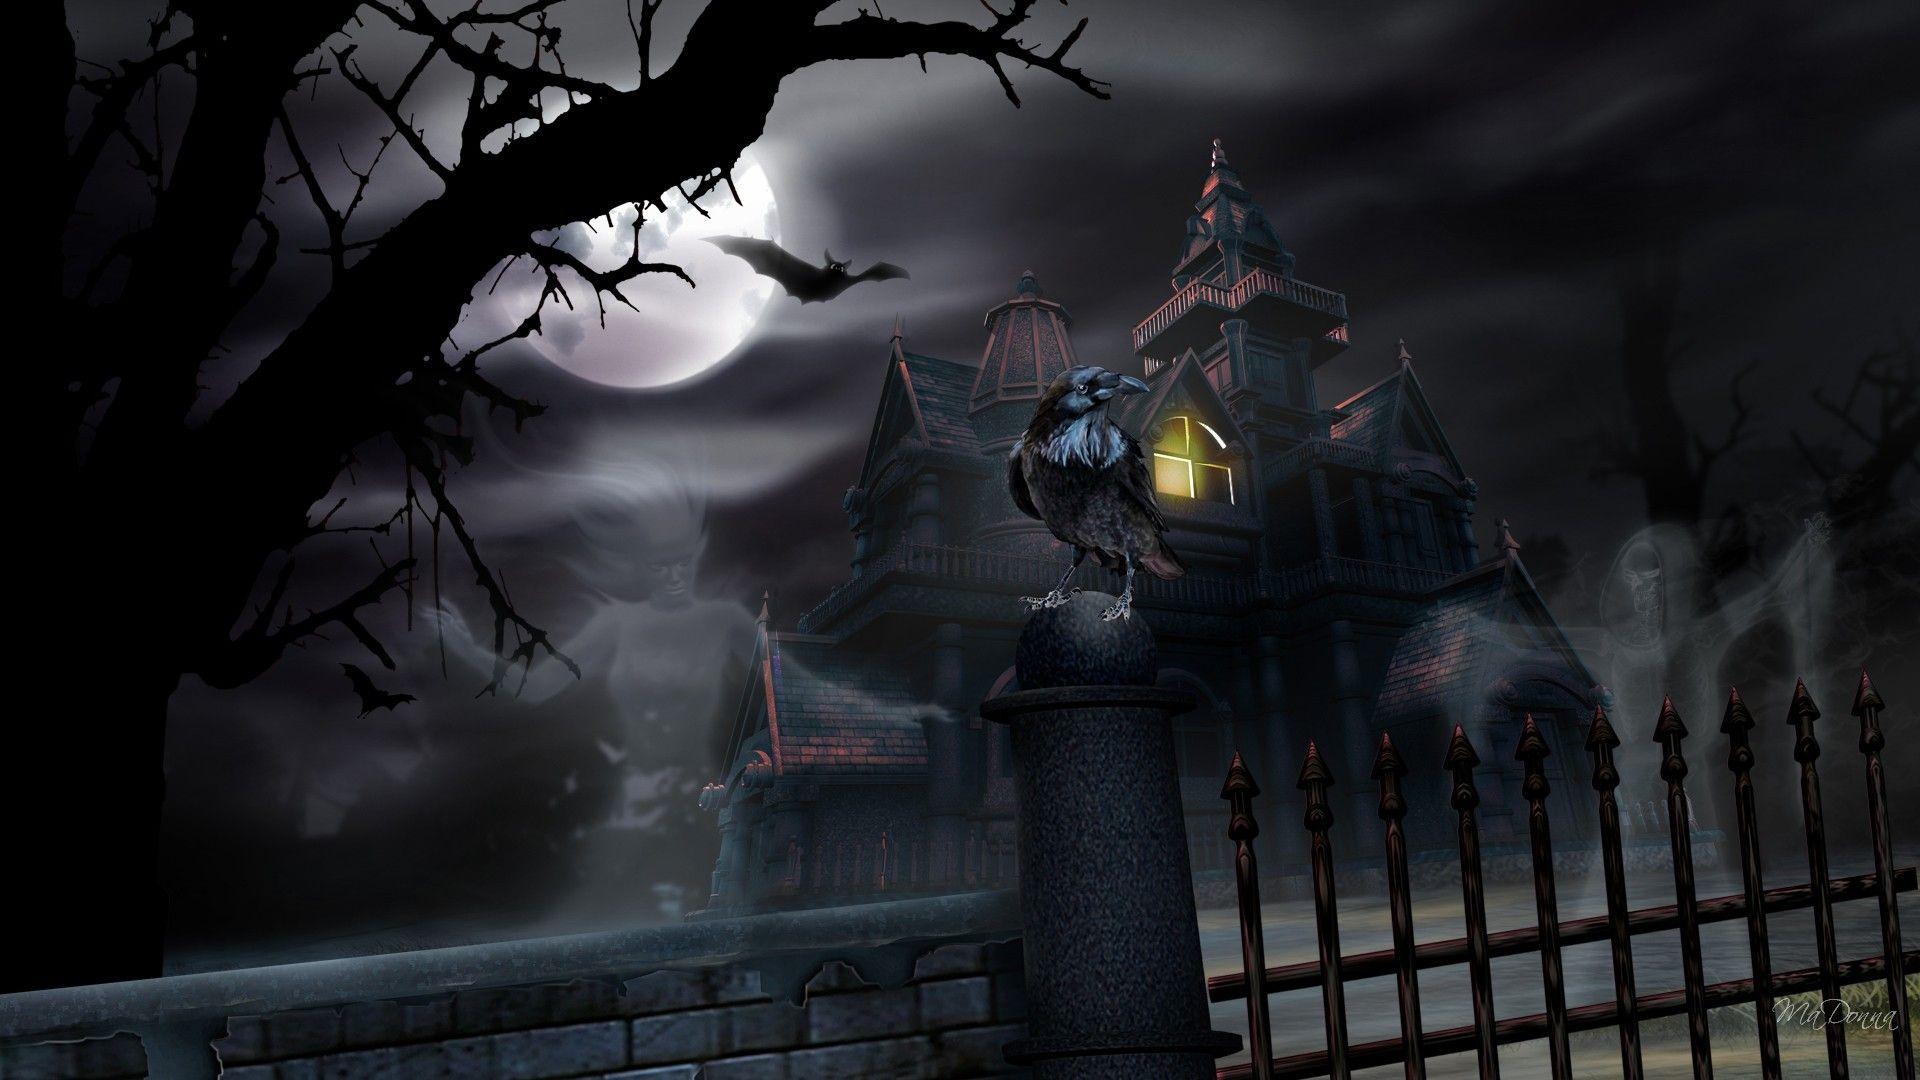 Haunted Tag wallpaper: STORMY HAUNTED HOUSE Clouds Sky Trees